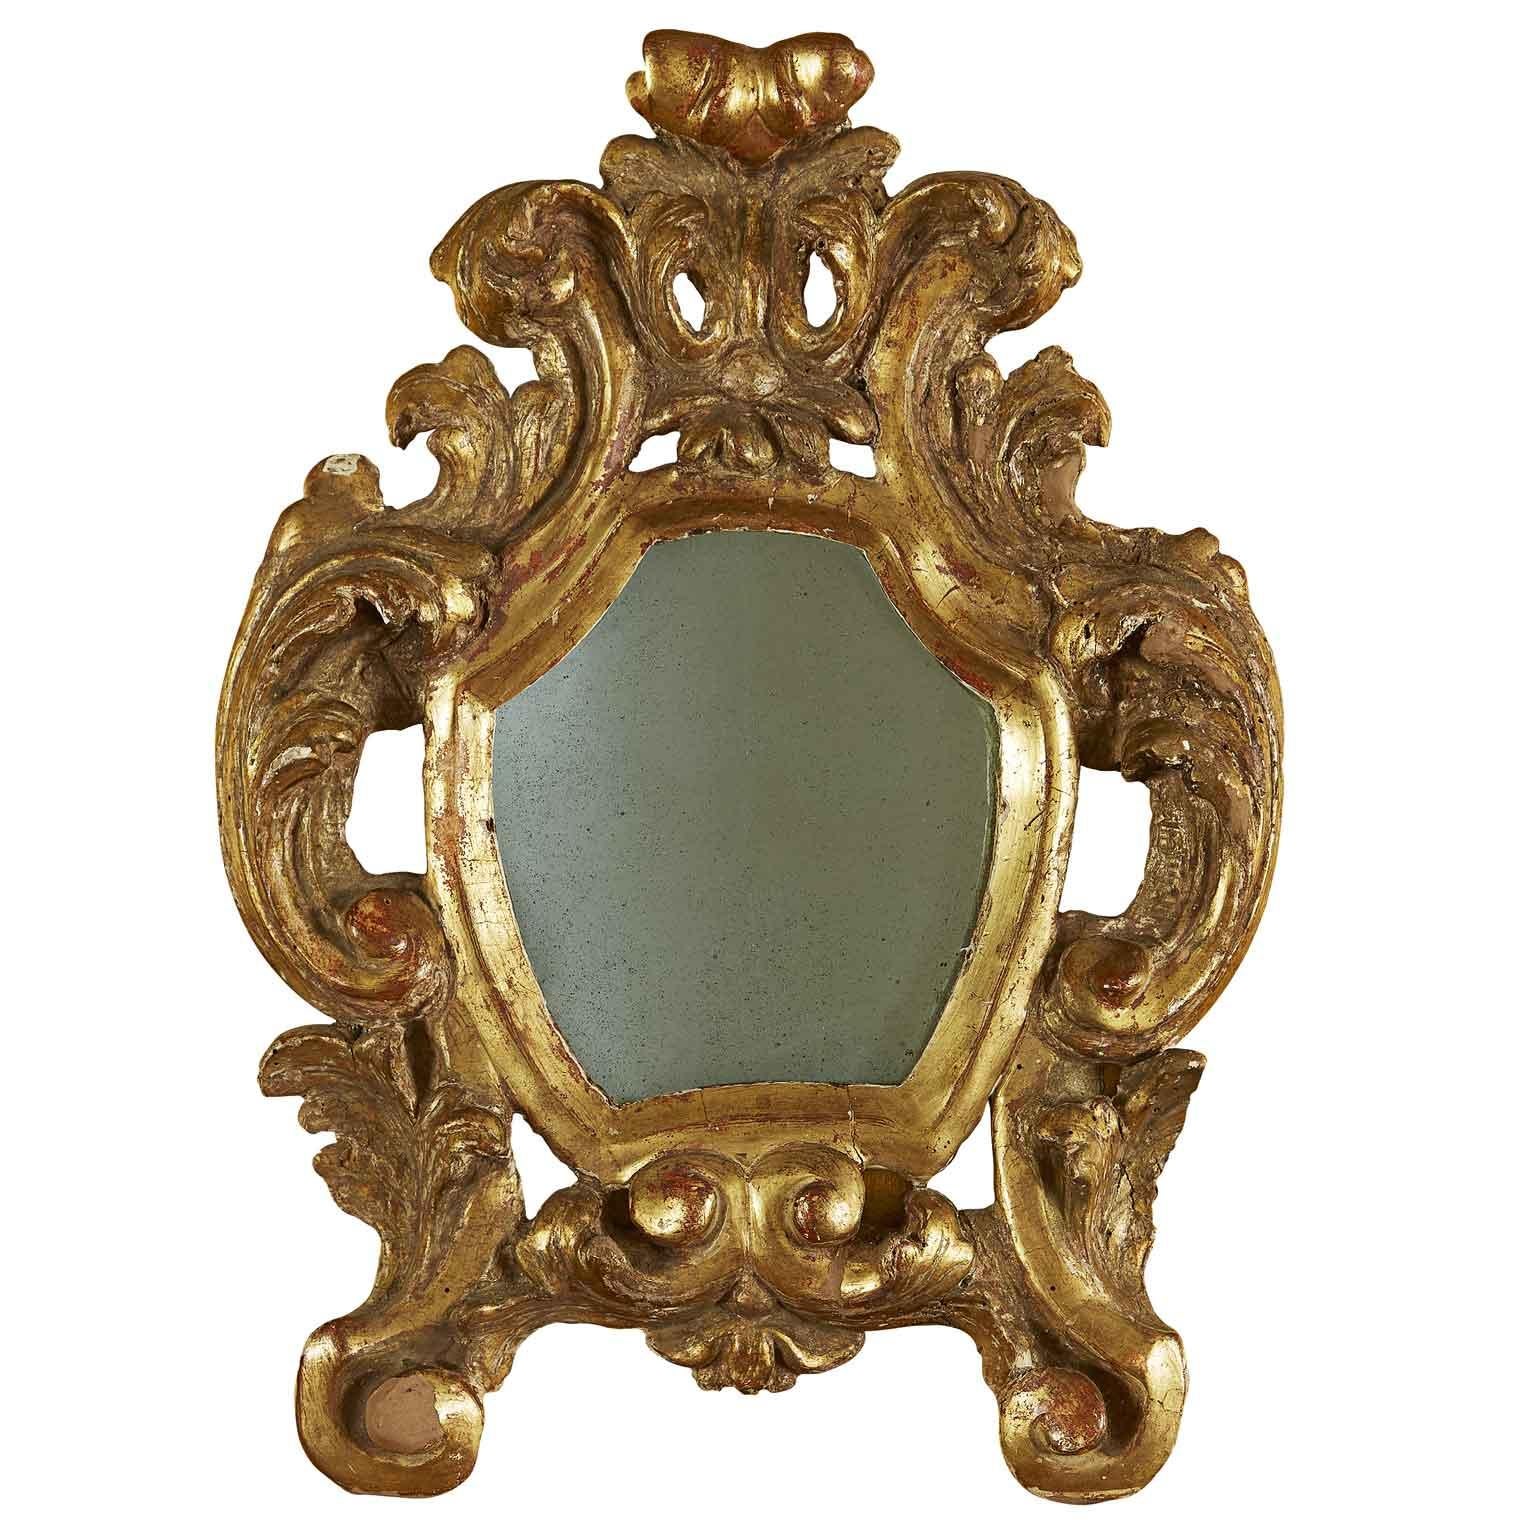 18th century Italian Louis XV style altar giltwood frames, two charming antique carved and giltwood frames, altar cards or cantagloria from Italy.
Shaped, with scrolling and acanthus leaf deep carving, they are realized in cembran pinewood and have